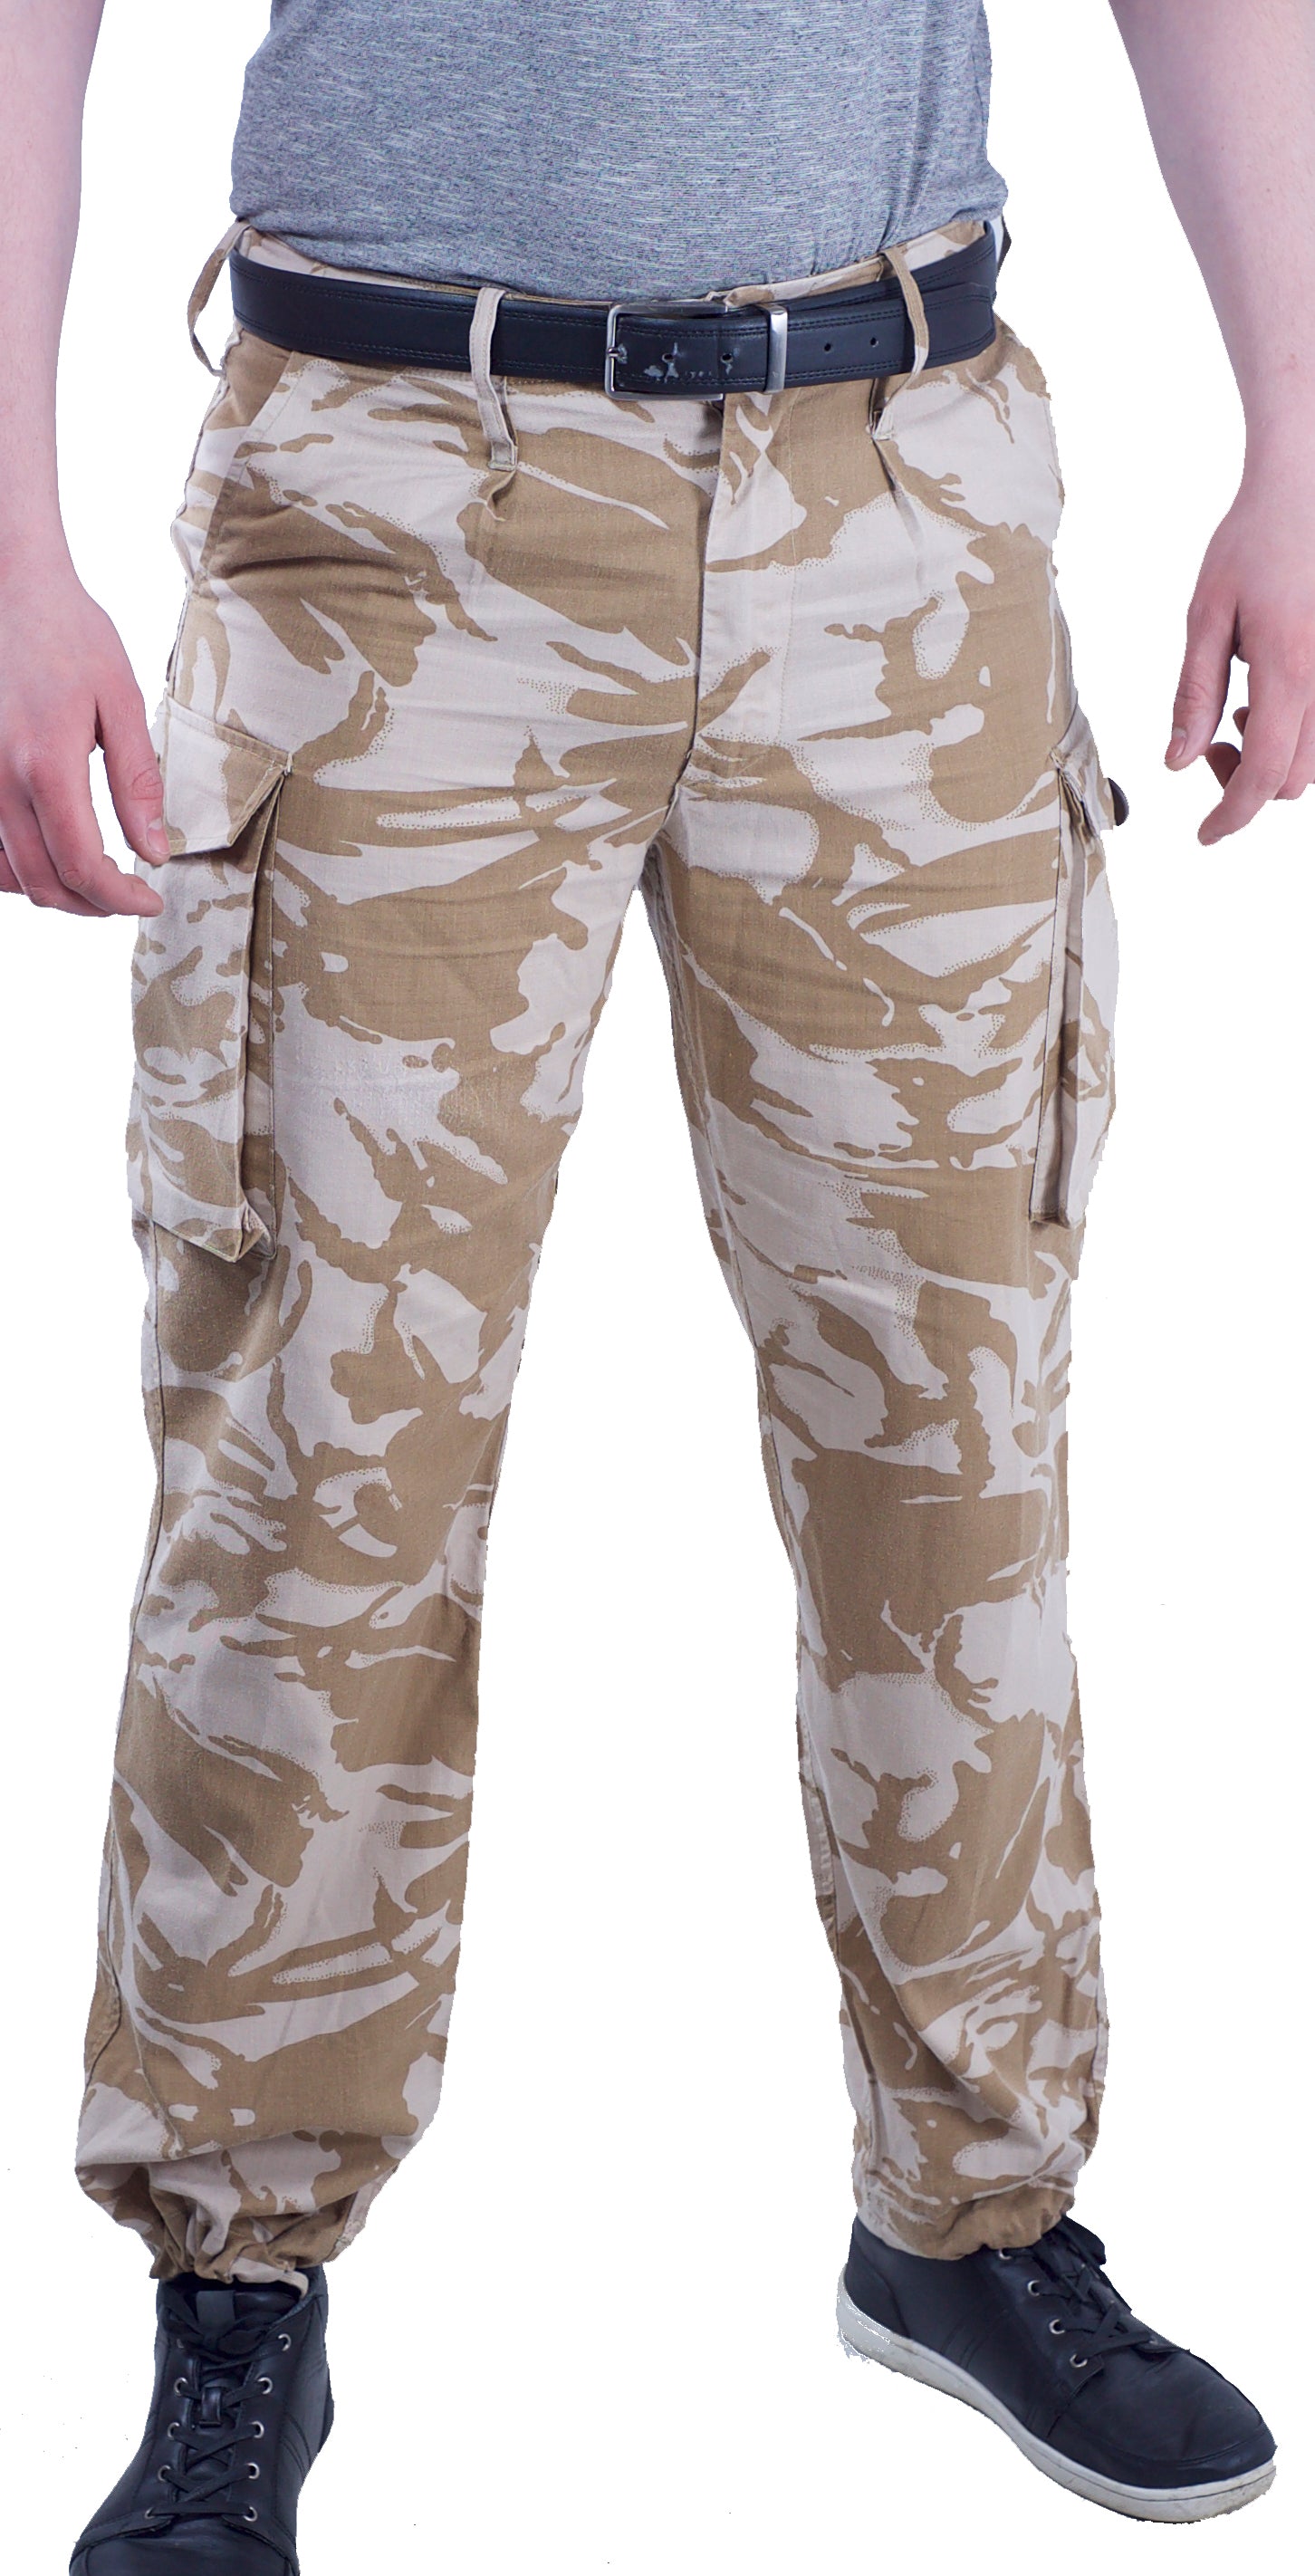 Size Sregular US Army Camo Pants Camouflage Ripstop Combat  Etsy